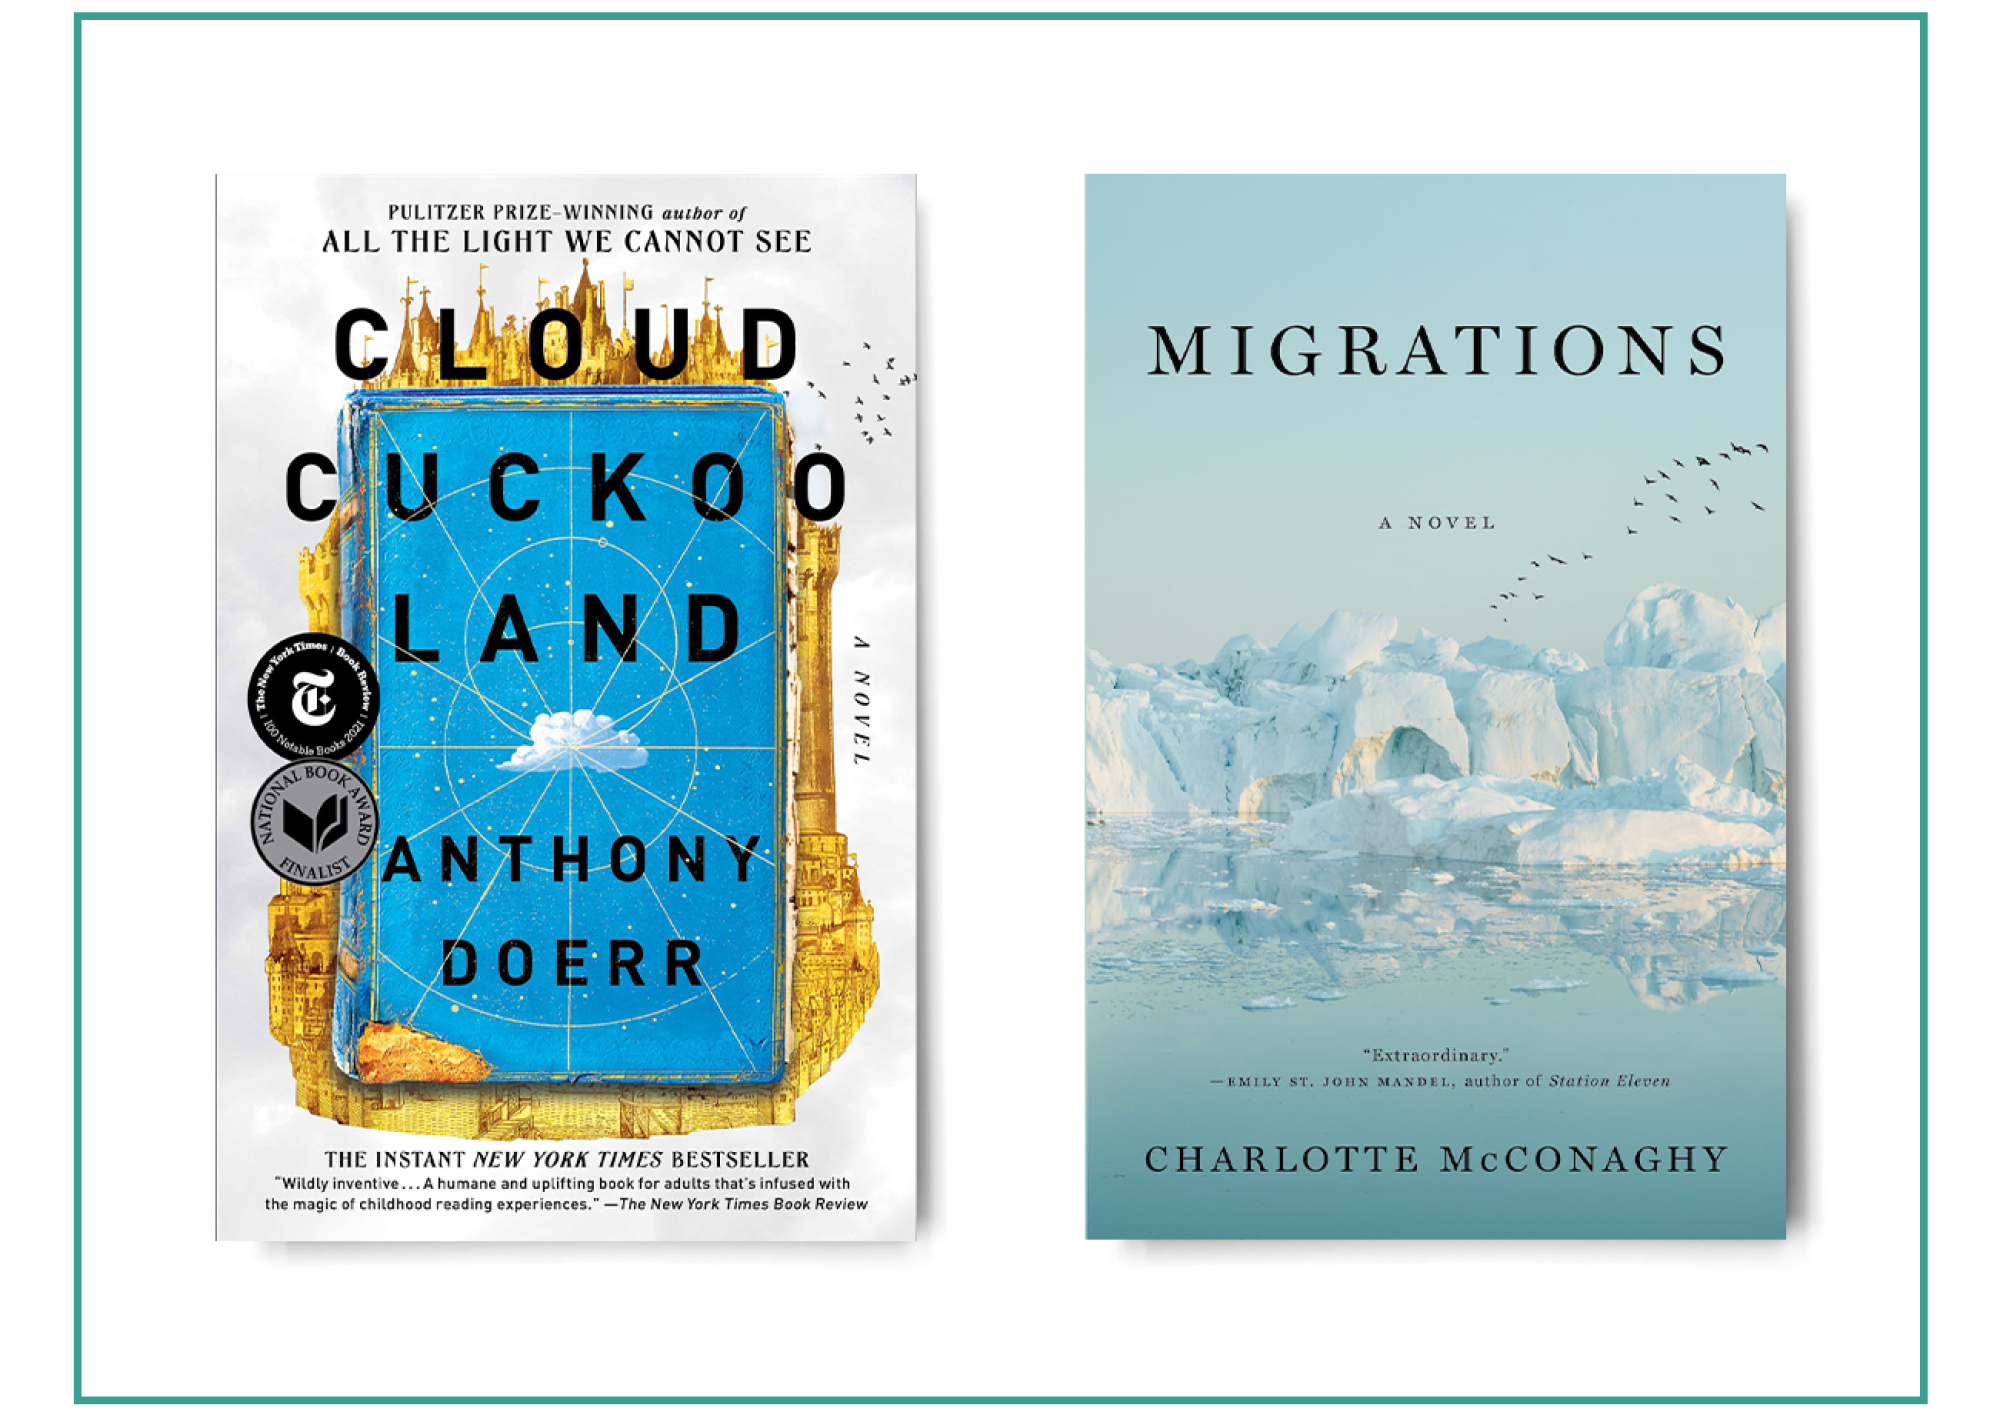 Book covers: "Cloud Cuckoo Land" and "Migrations"